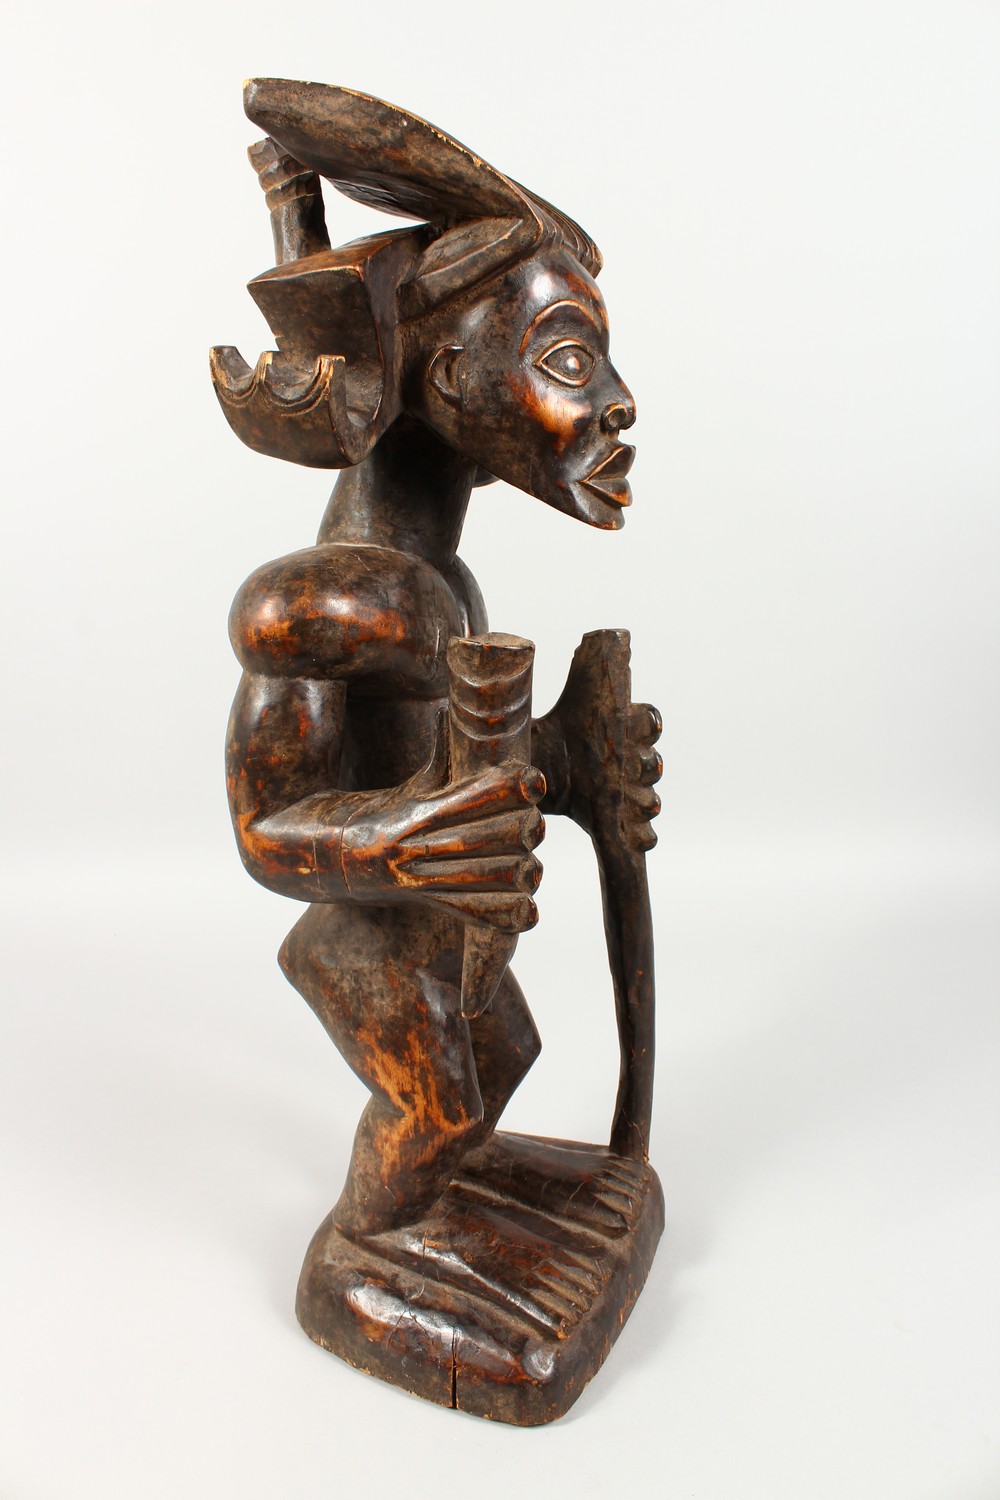 A CARVED WOOD TRIBAL STANDING FIGURE, of a man with headdress, holding a staff. 23ins high. - Image 3 of 6